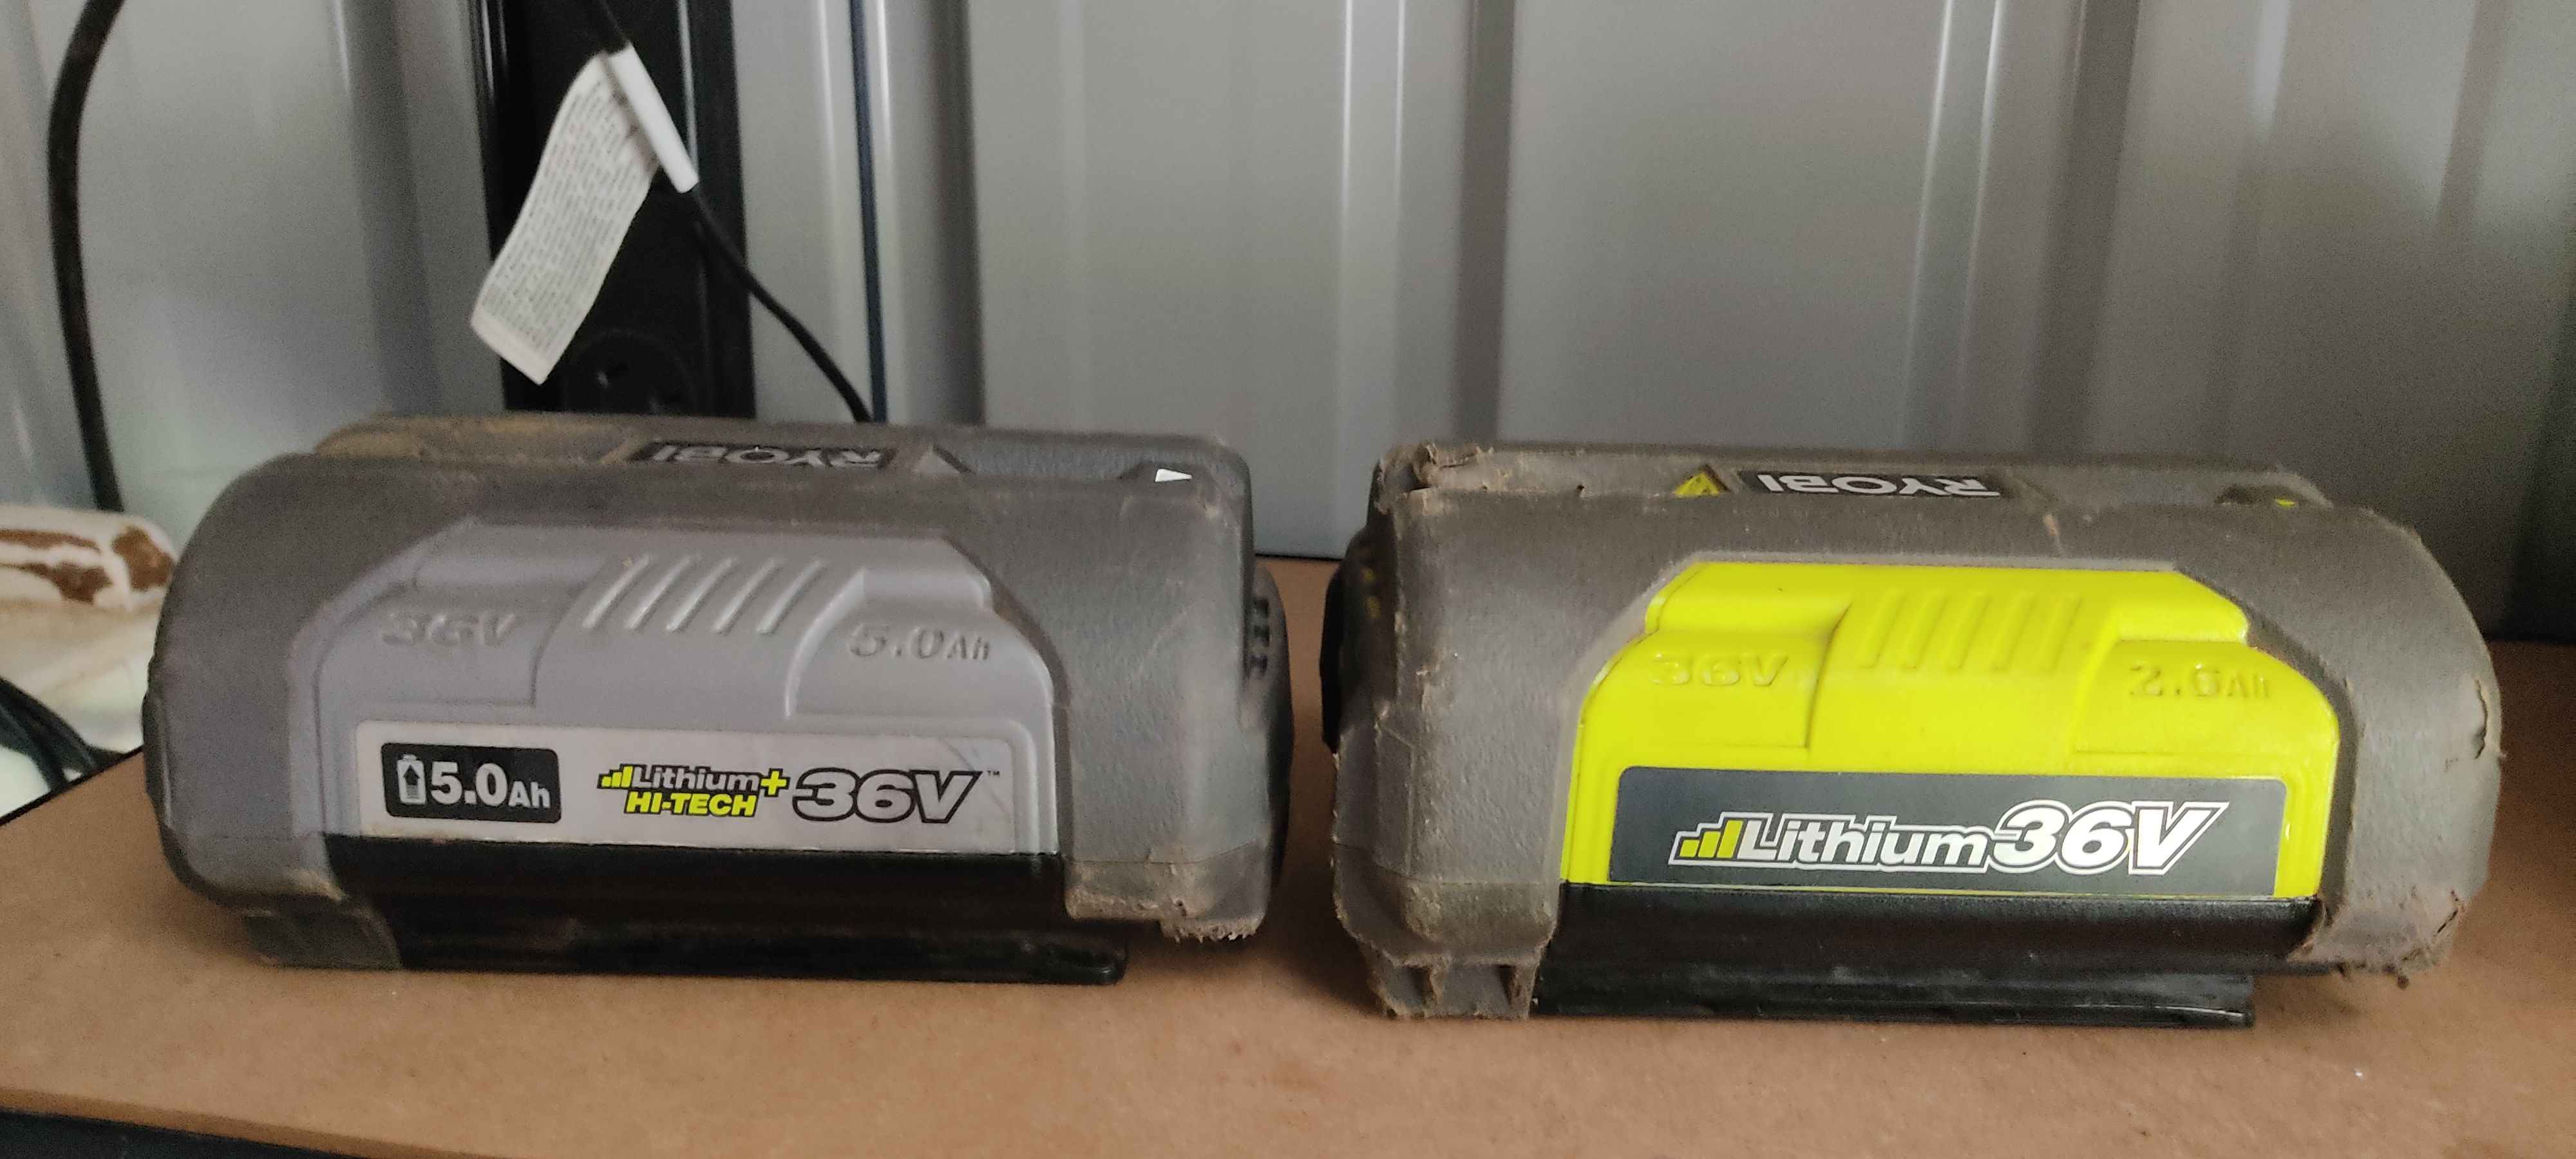 What Ryobi products batteries are Bunnings Workshop community